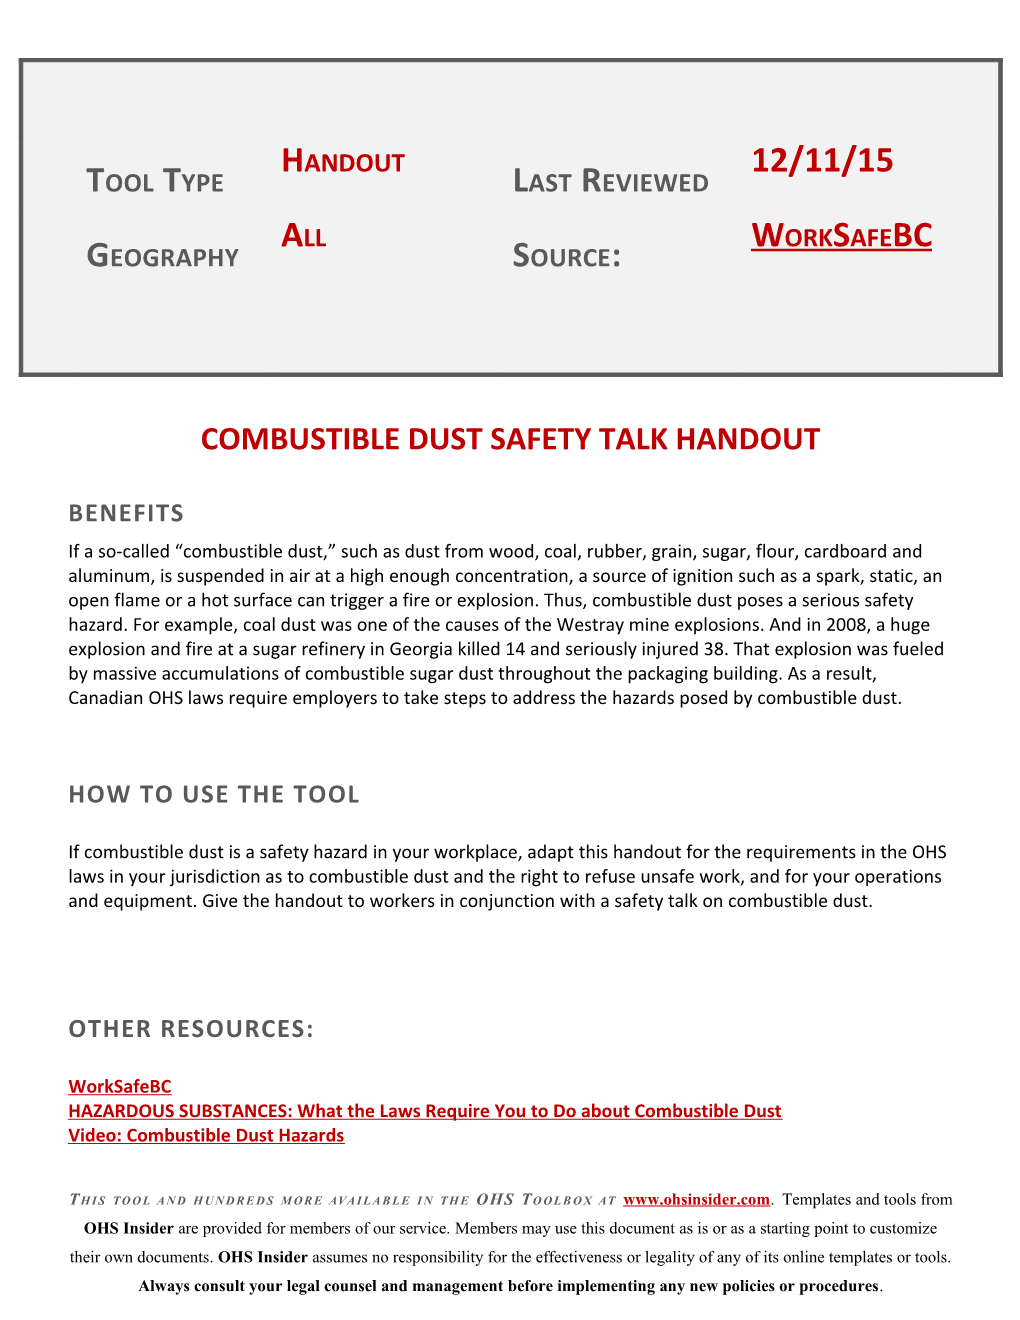 Combustible Dustsafety Talkhandout